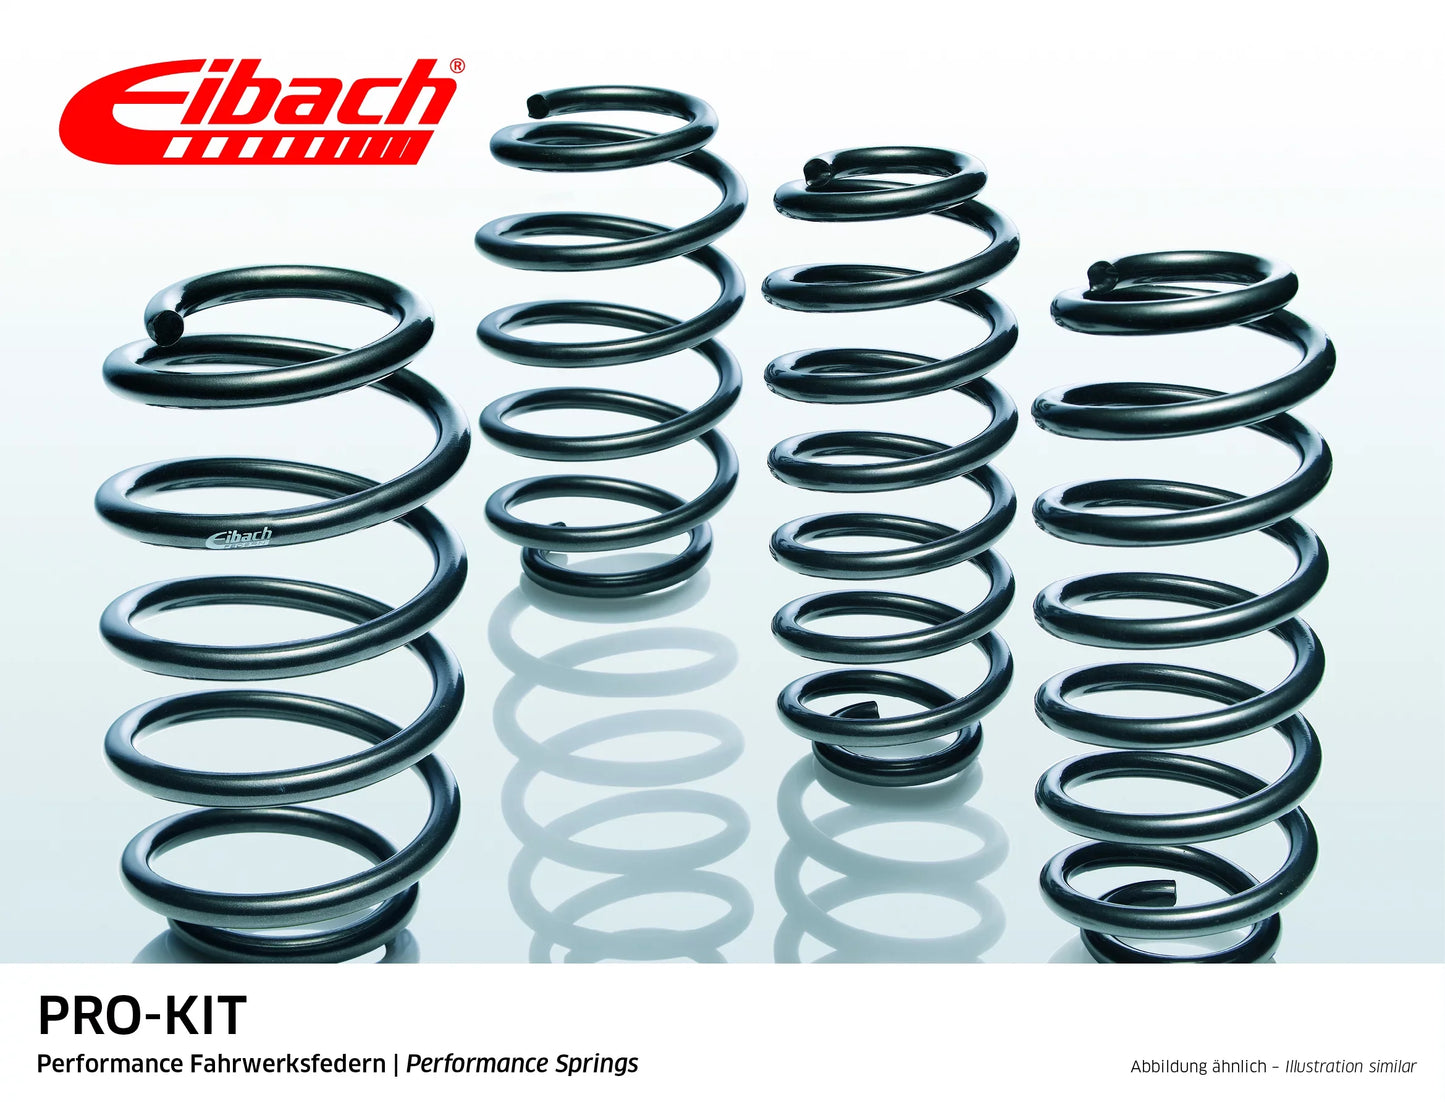 Eibach Pro-Kit Lowering Springs (E8513-140) at £283.00